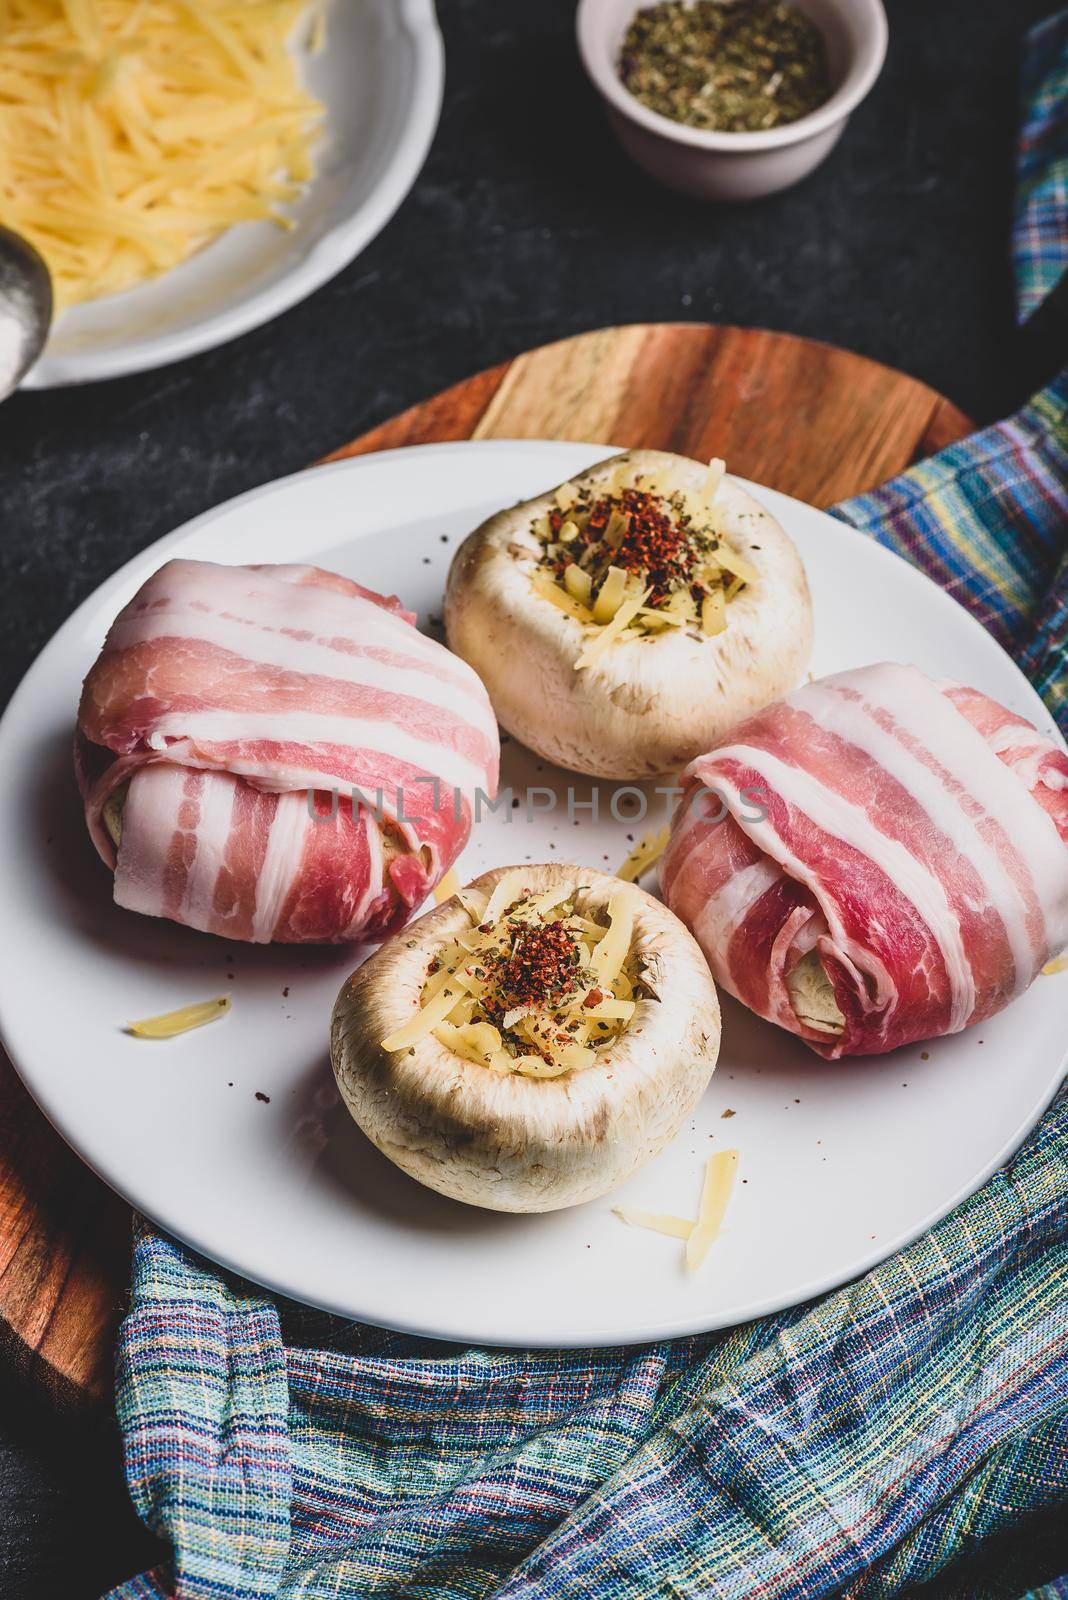 Bacon-wrapped button mushrooms stuffed with cheese by Seva_blsv